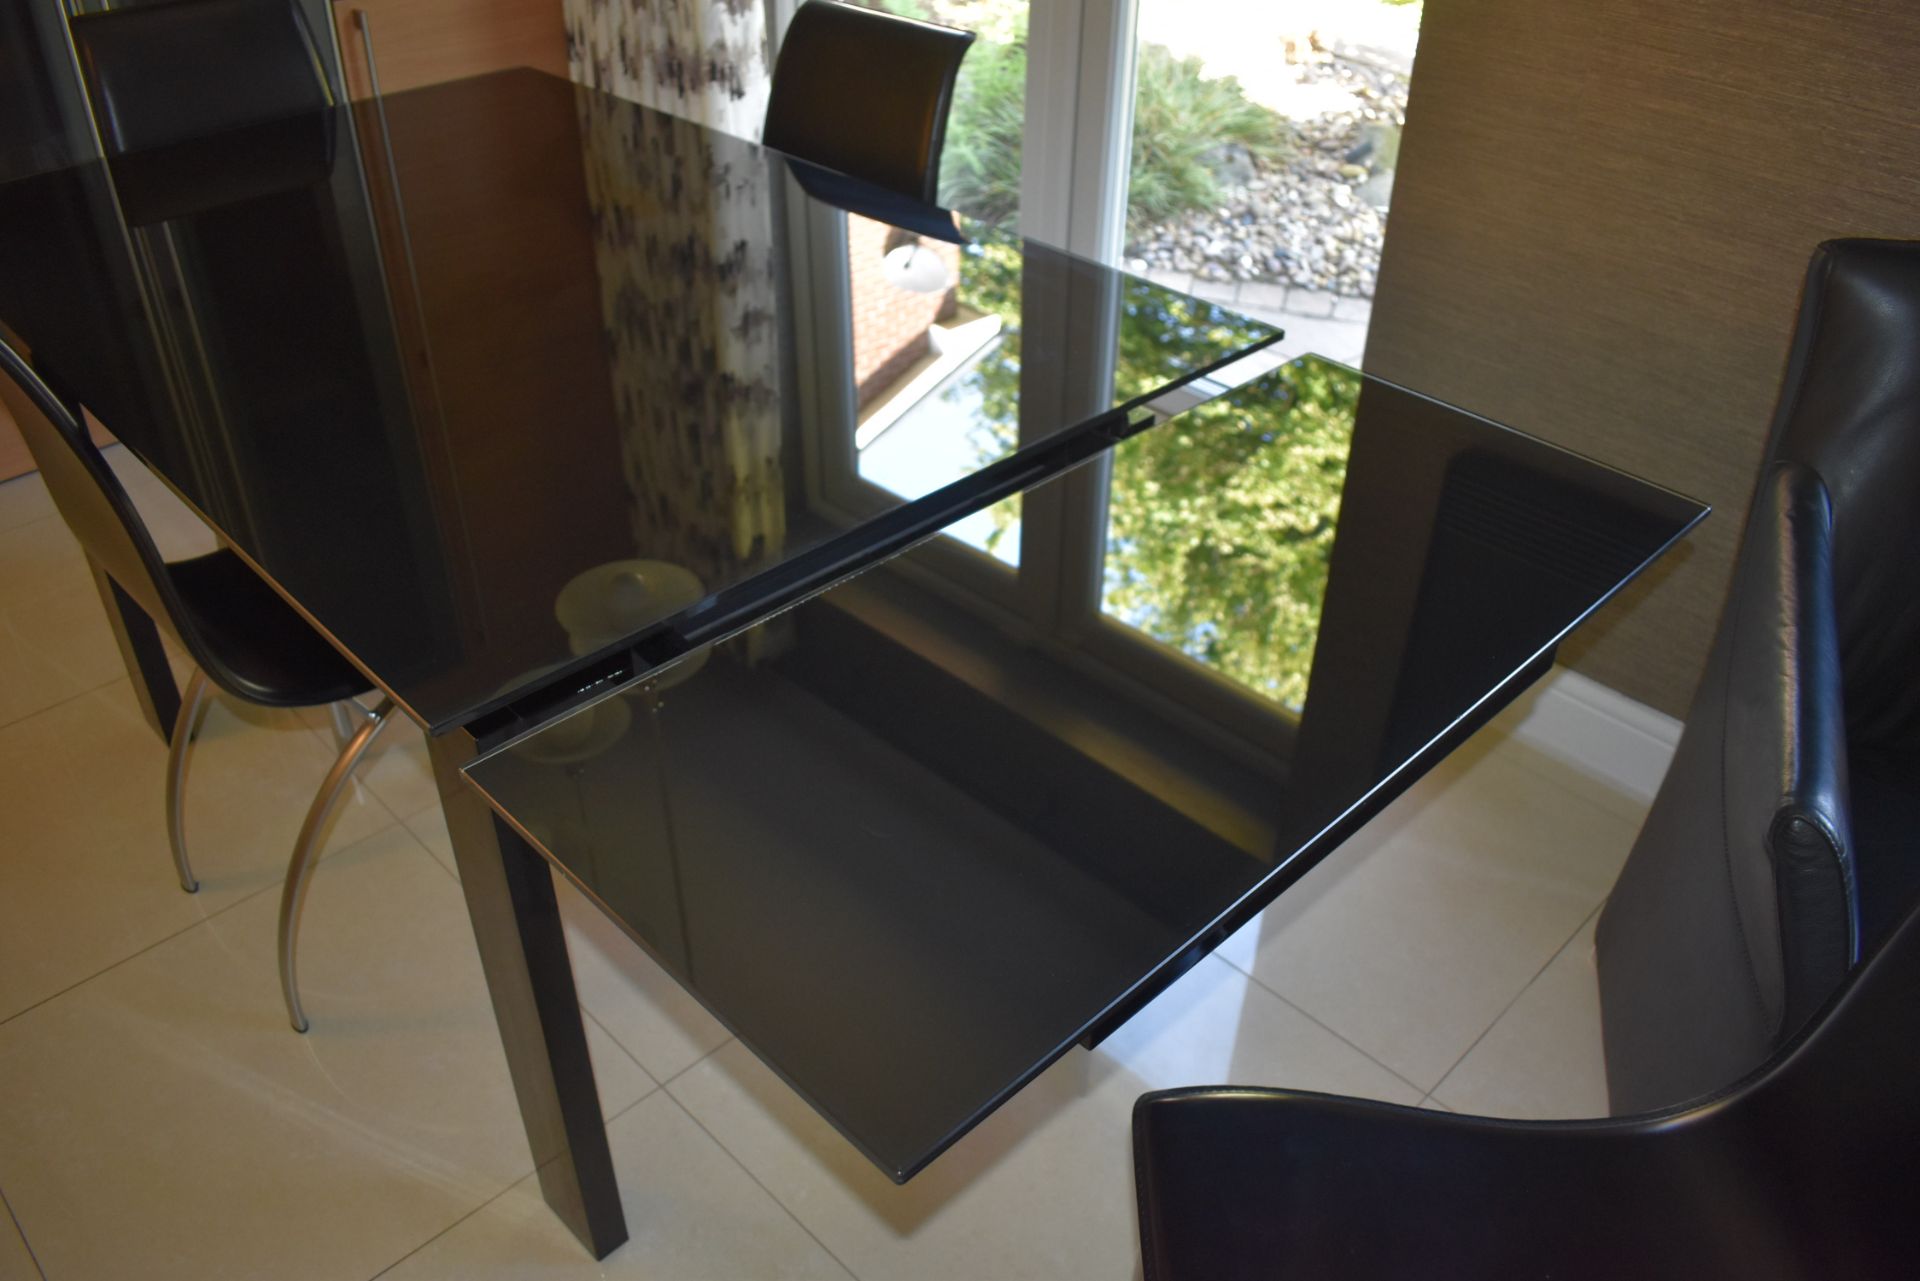 1 x Casabella Tempered Black Glass Extending Dining Table With Four Chairs - Stunning Contemporary - Image 6 of 17